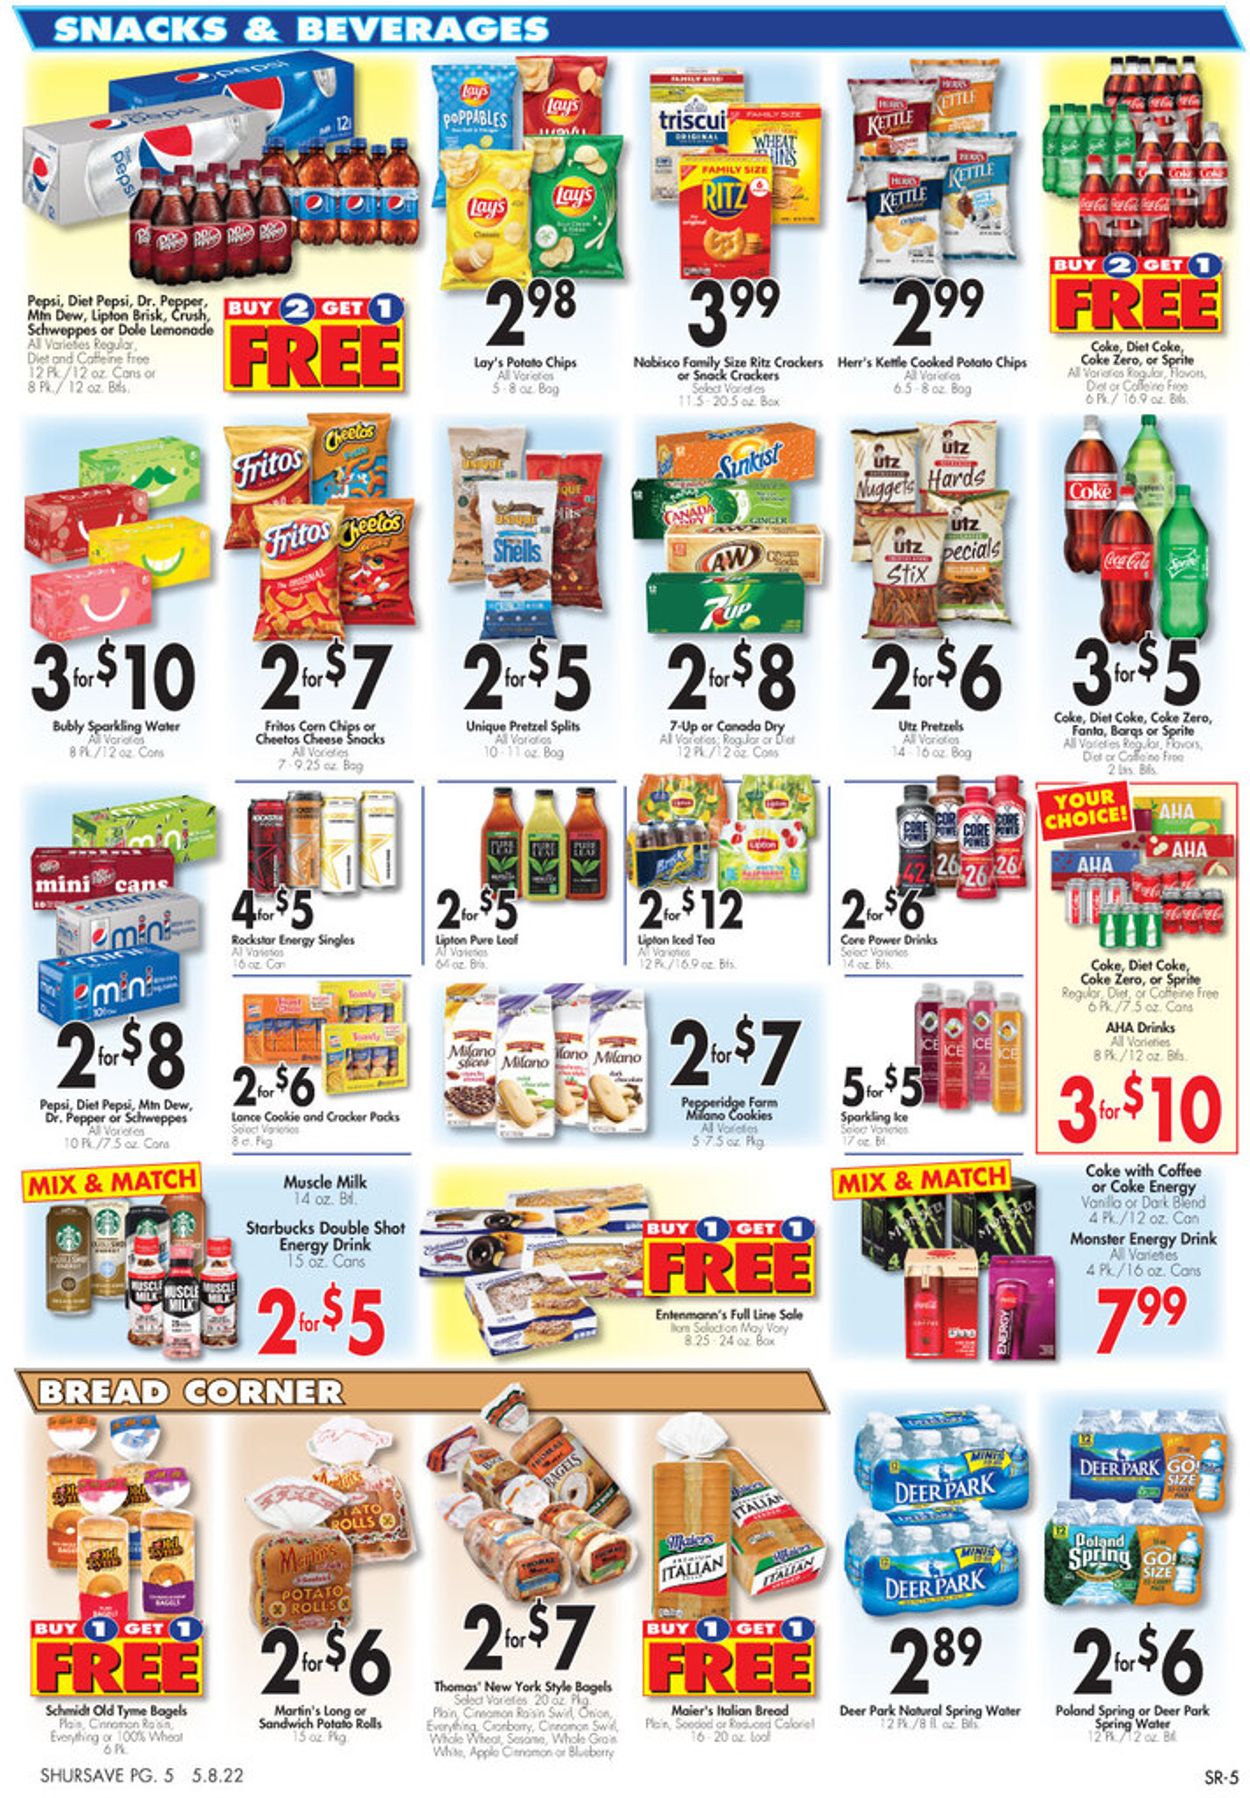 Gerrity's Supermarkets Ad from 05/08/2022